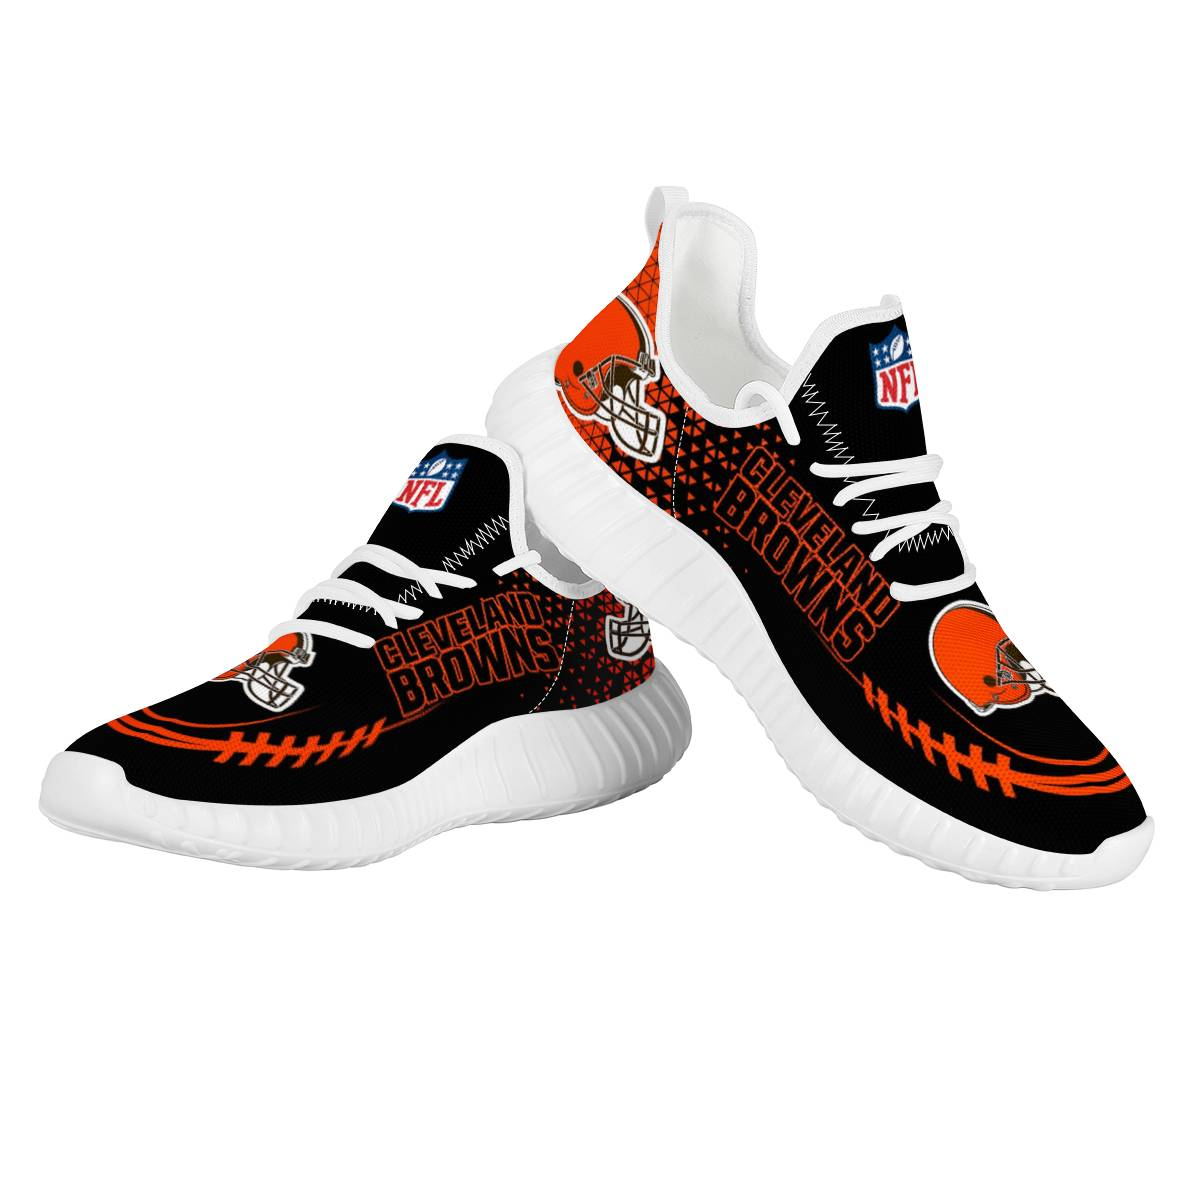 Men's Cleveland Browns Mesh Knit Sneakers/Shoes 006